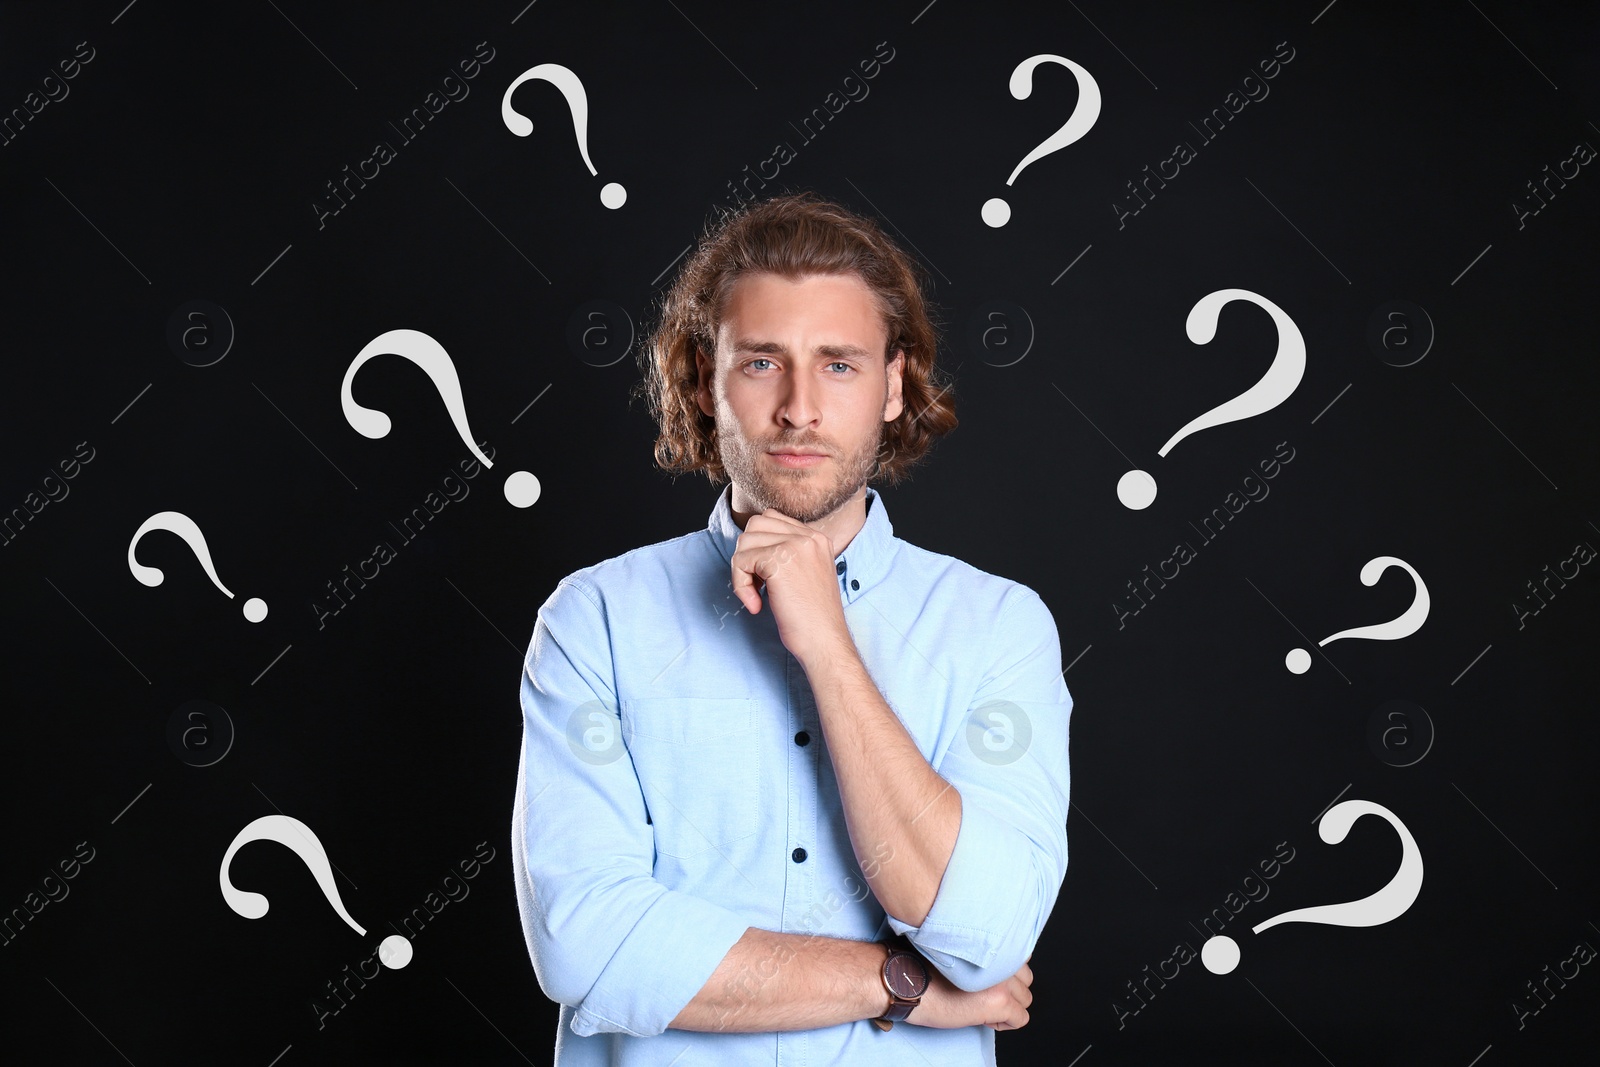 Image of Choice in profession or other areas of life, concept. Making decision, thoughtful young man surrounded by drawn question marks on black background